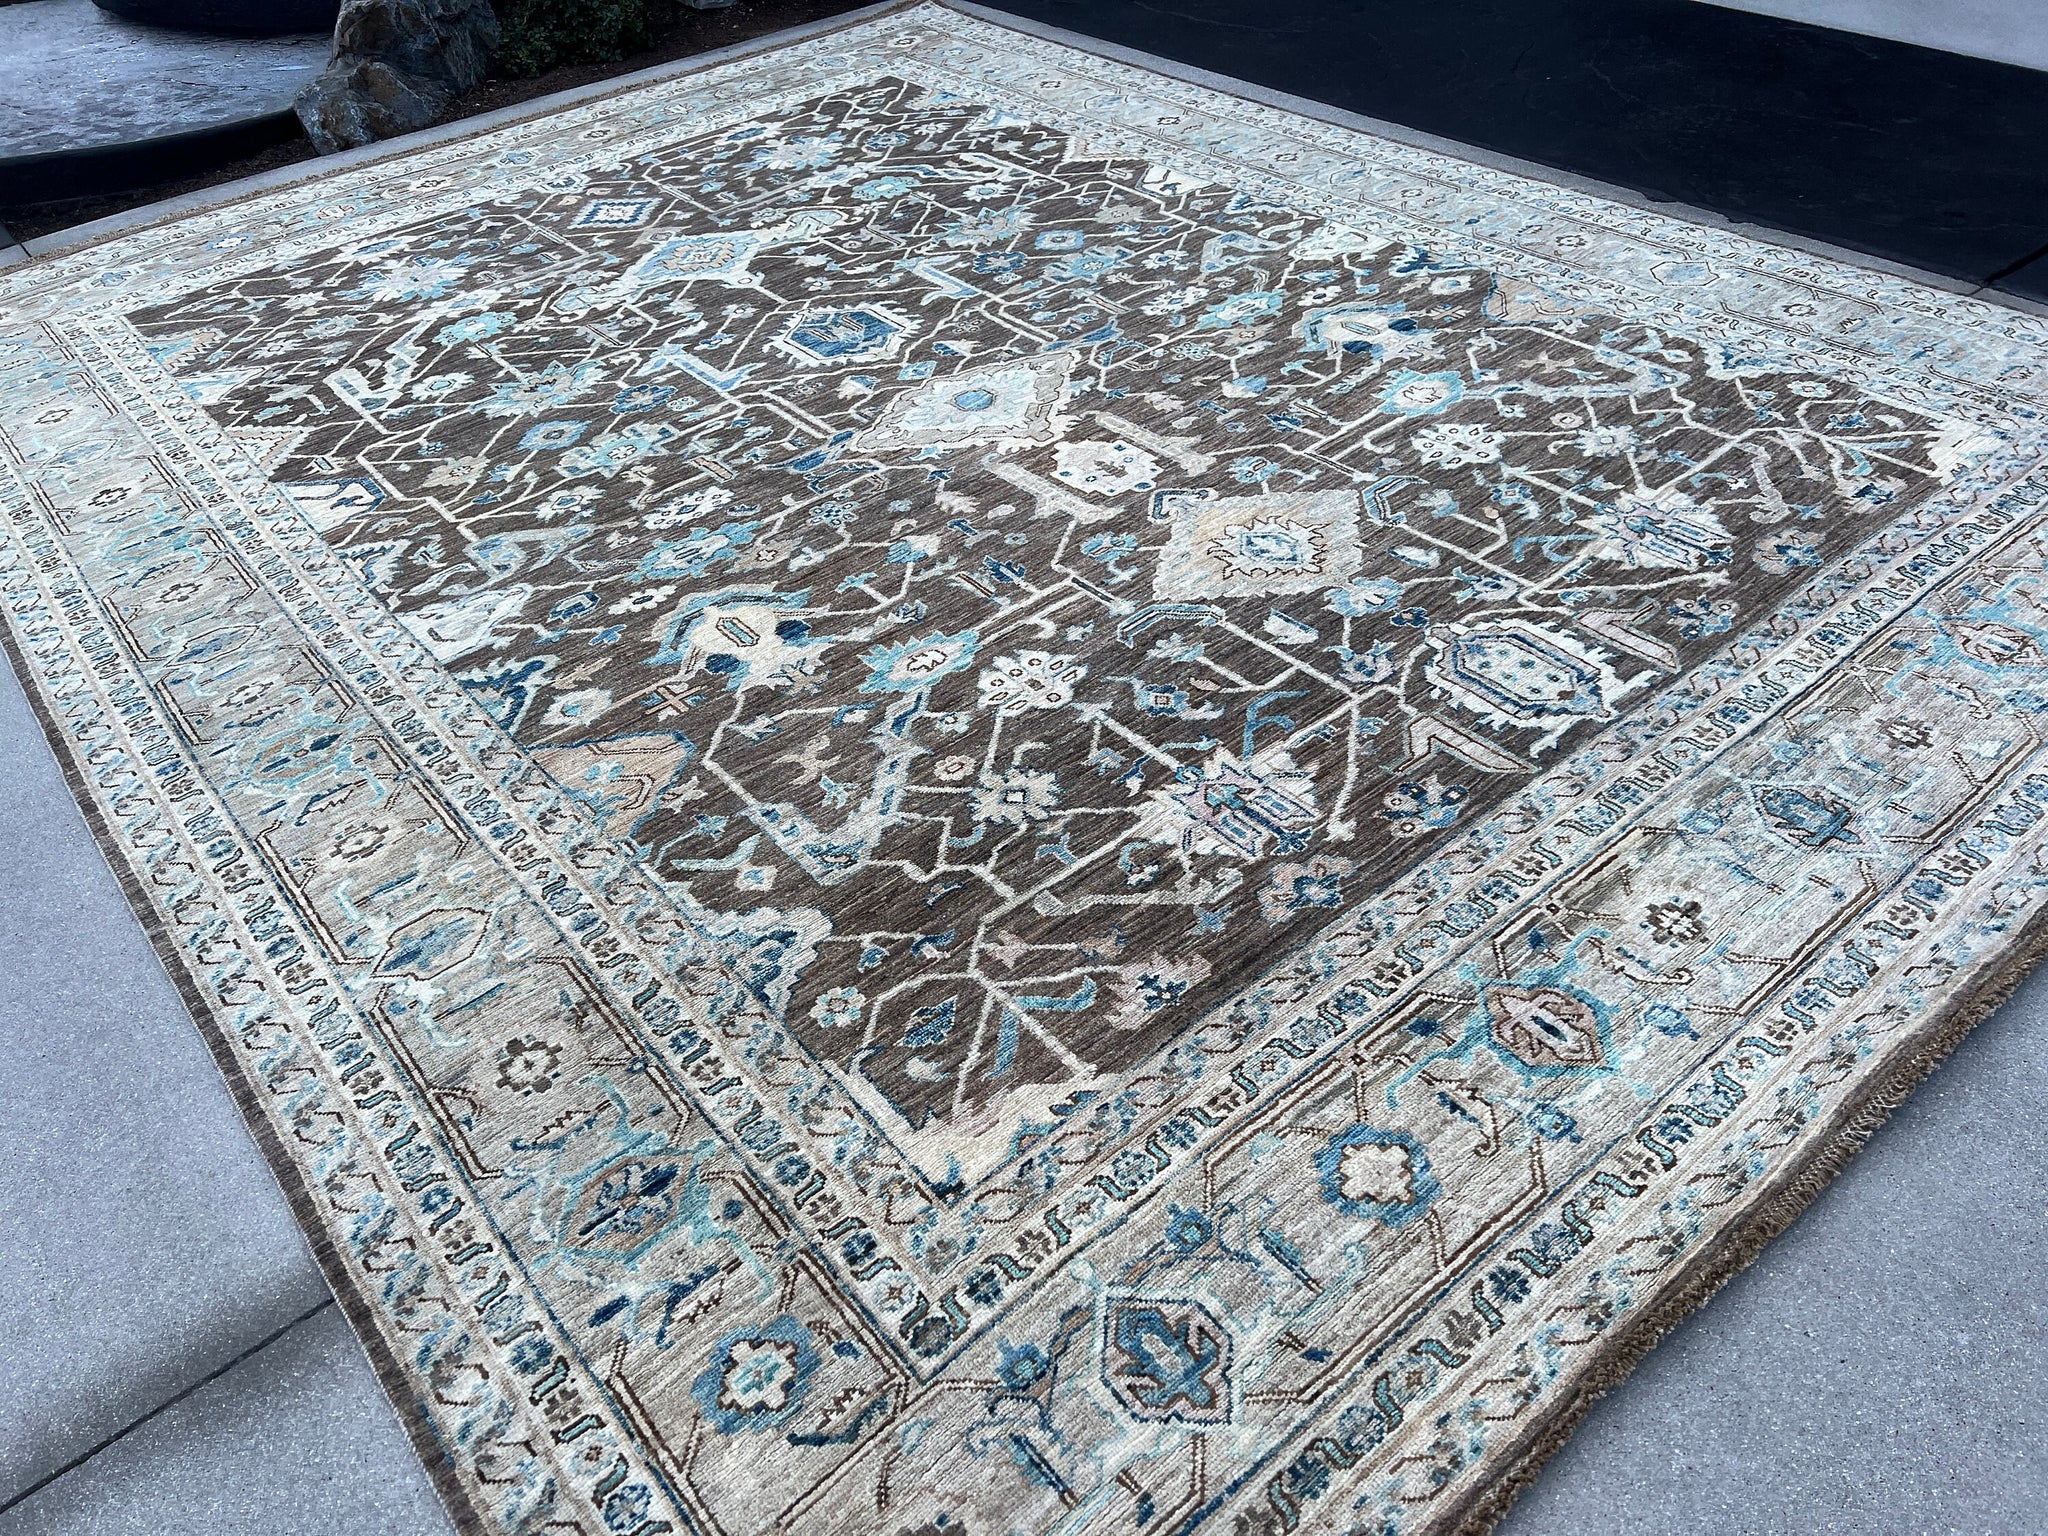 9x12 (275x365) Handmade Afghan Rug | Beige Grey Brown Copper Light Navy Blue Turquoise Ivory | Turkish Oushak Wool Hand Knotted Fair Trade